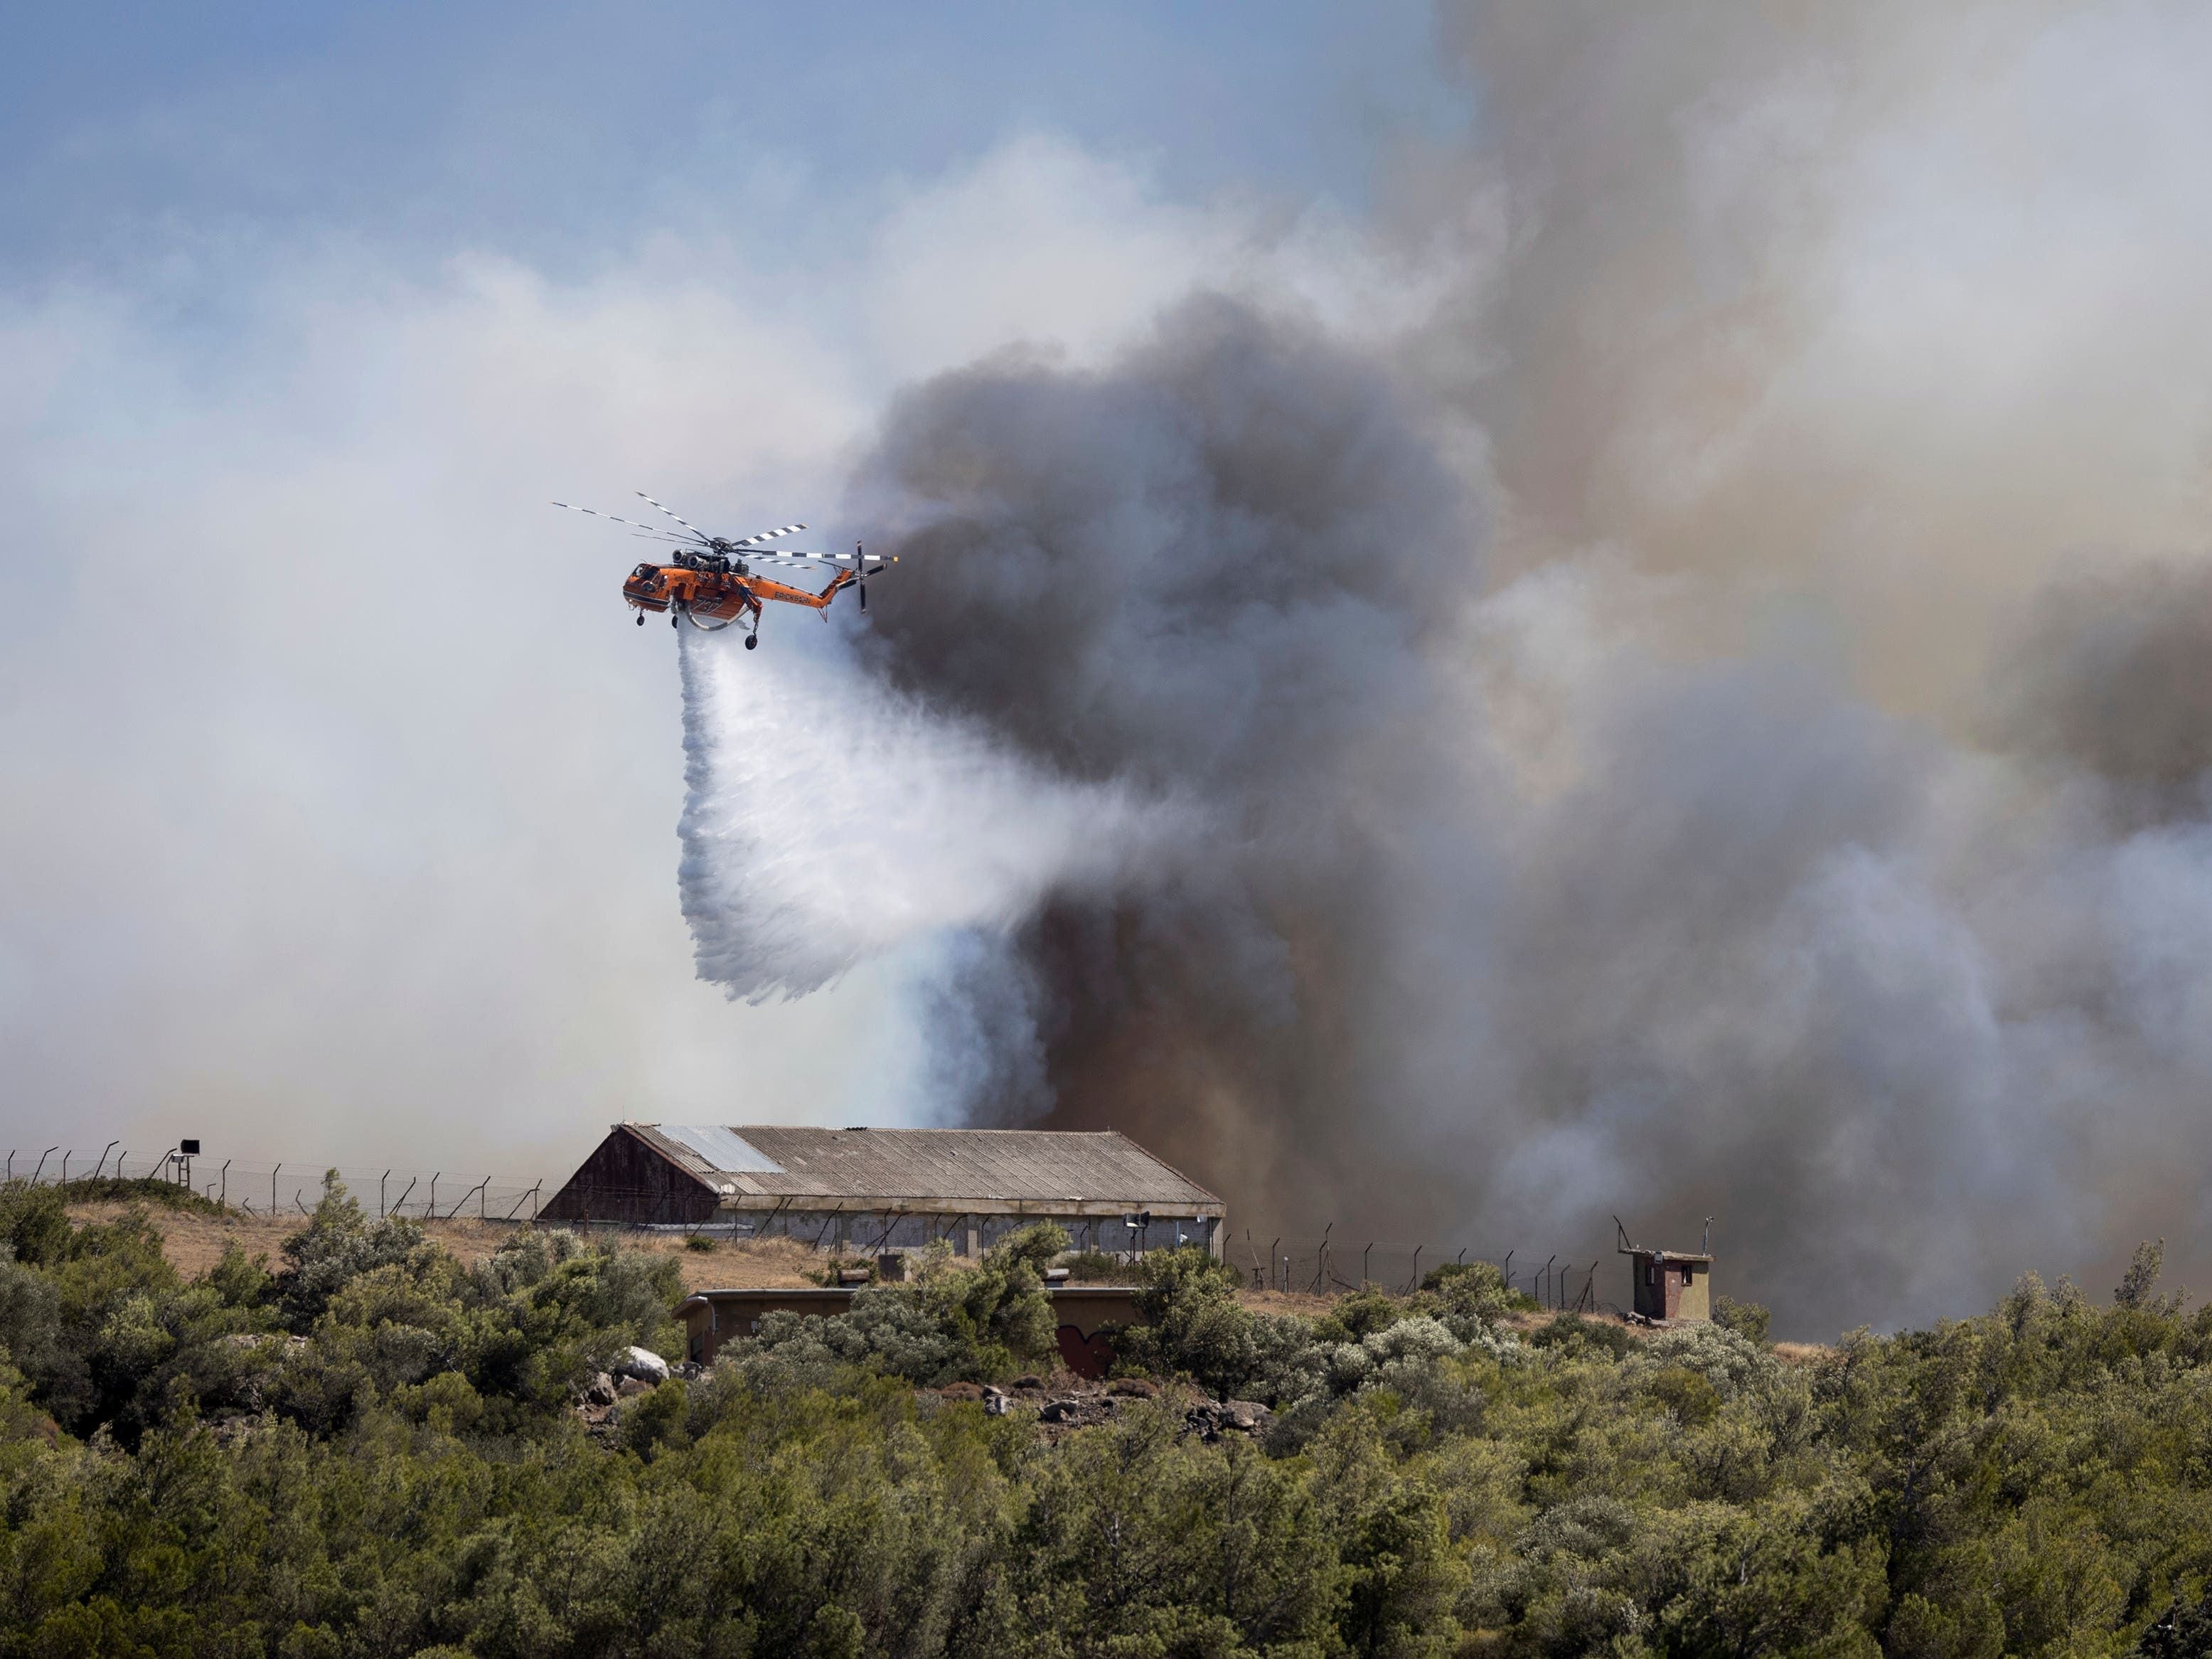 Firefighters tackle blazes on Greek islands of Chios and Kos